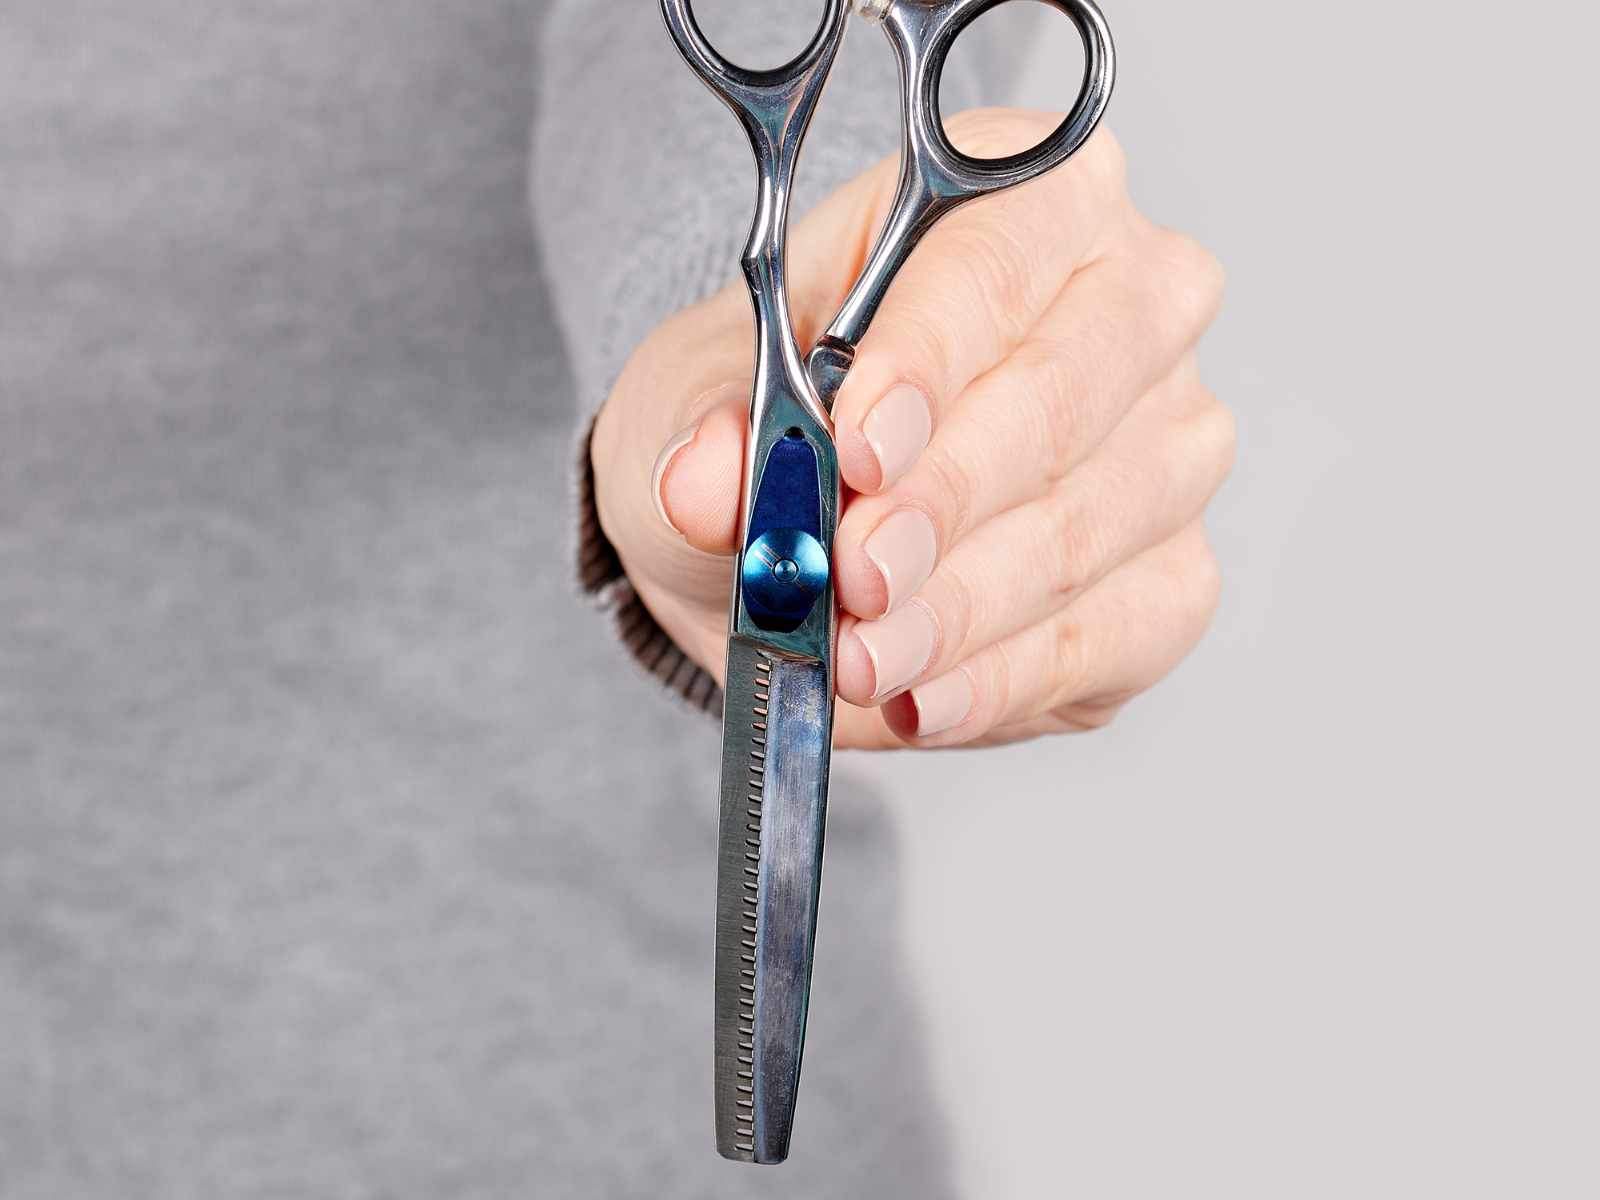 Texturizing Scissors How To Guide | Using Texturizing Shears on Hair